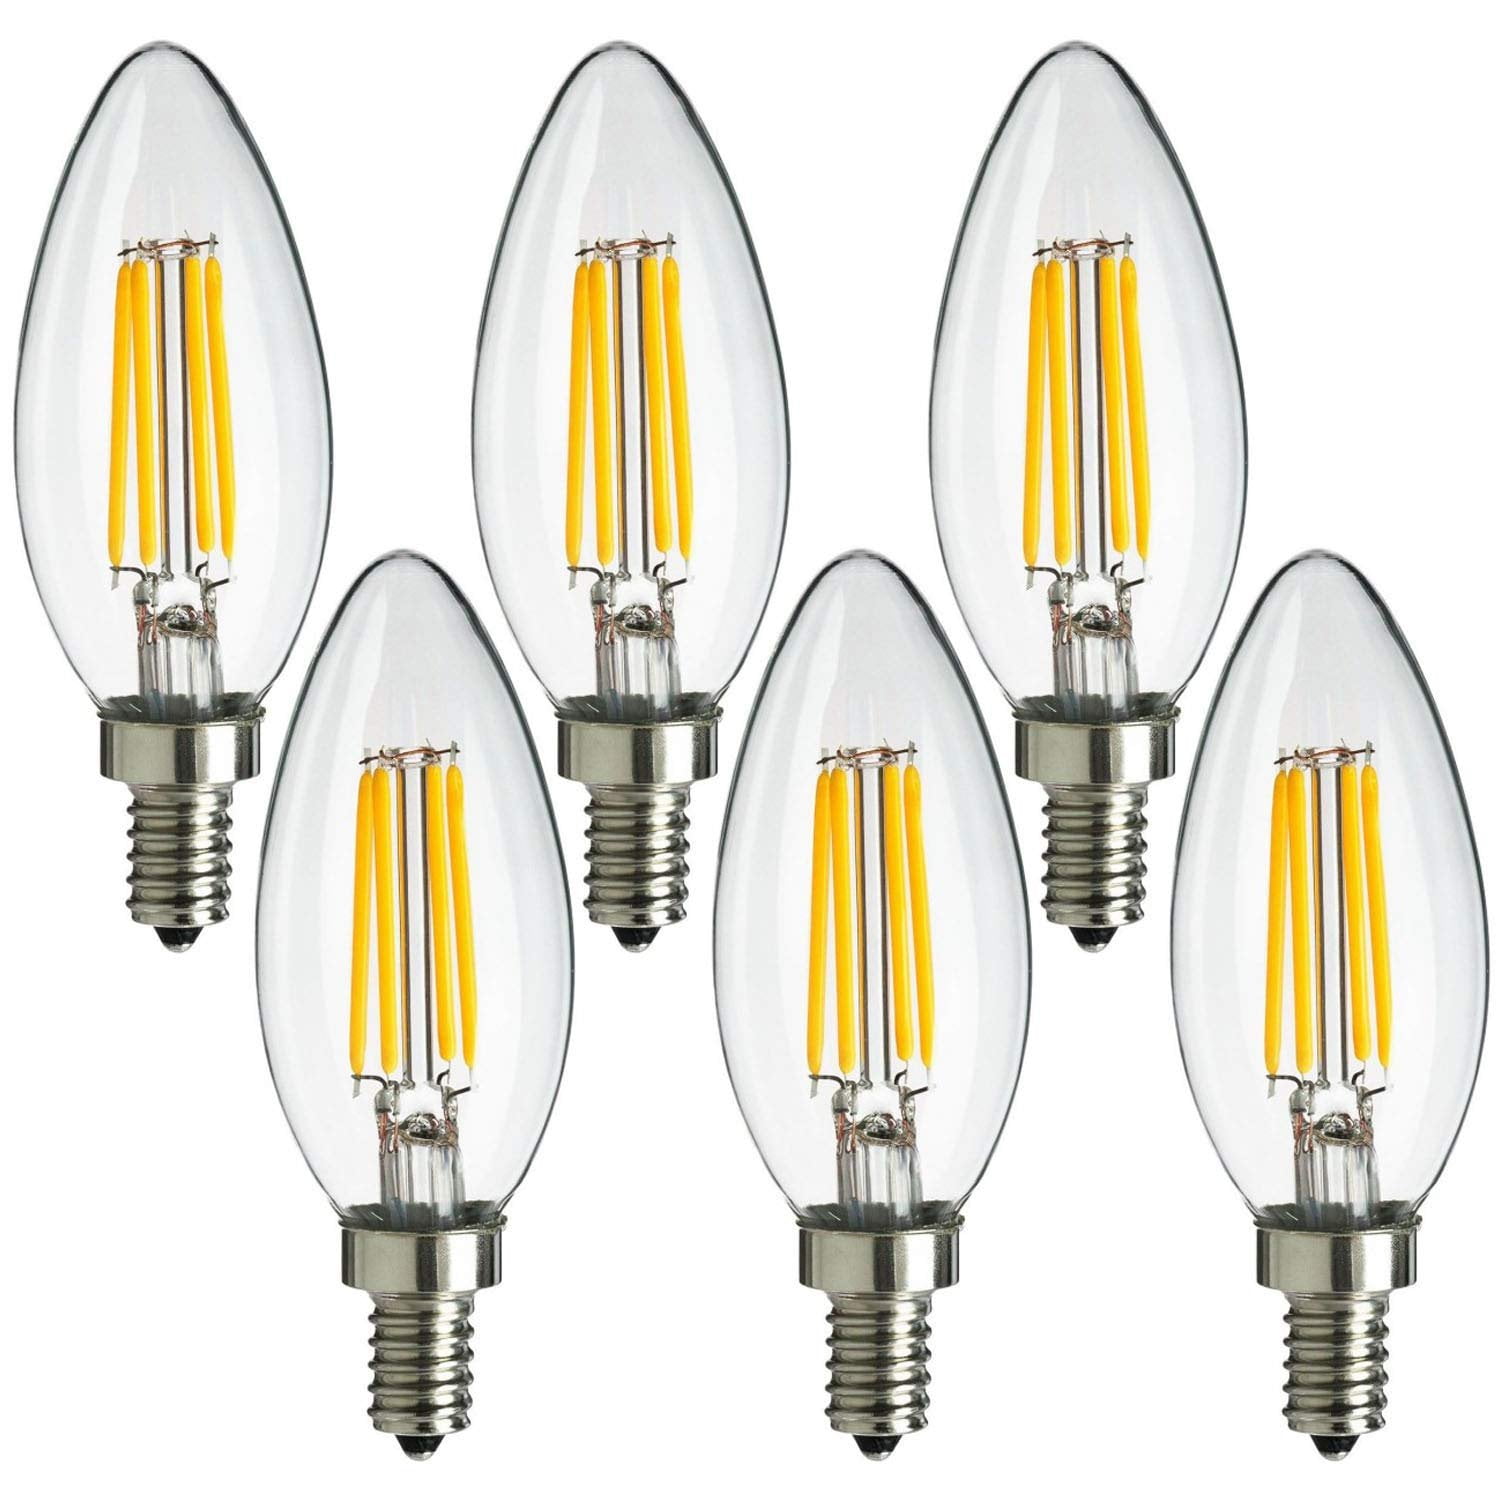 6 x E14 5W DIMMABLE LED SMD Bulbs Golden Chandelier Candelabra Candle Light Bulb 